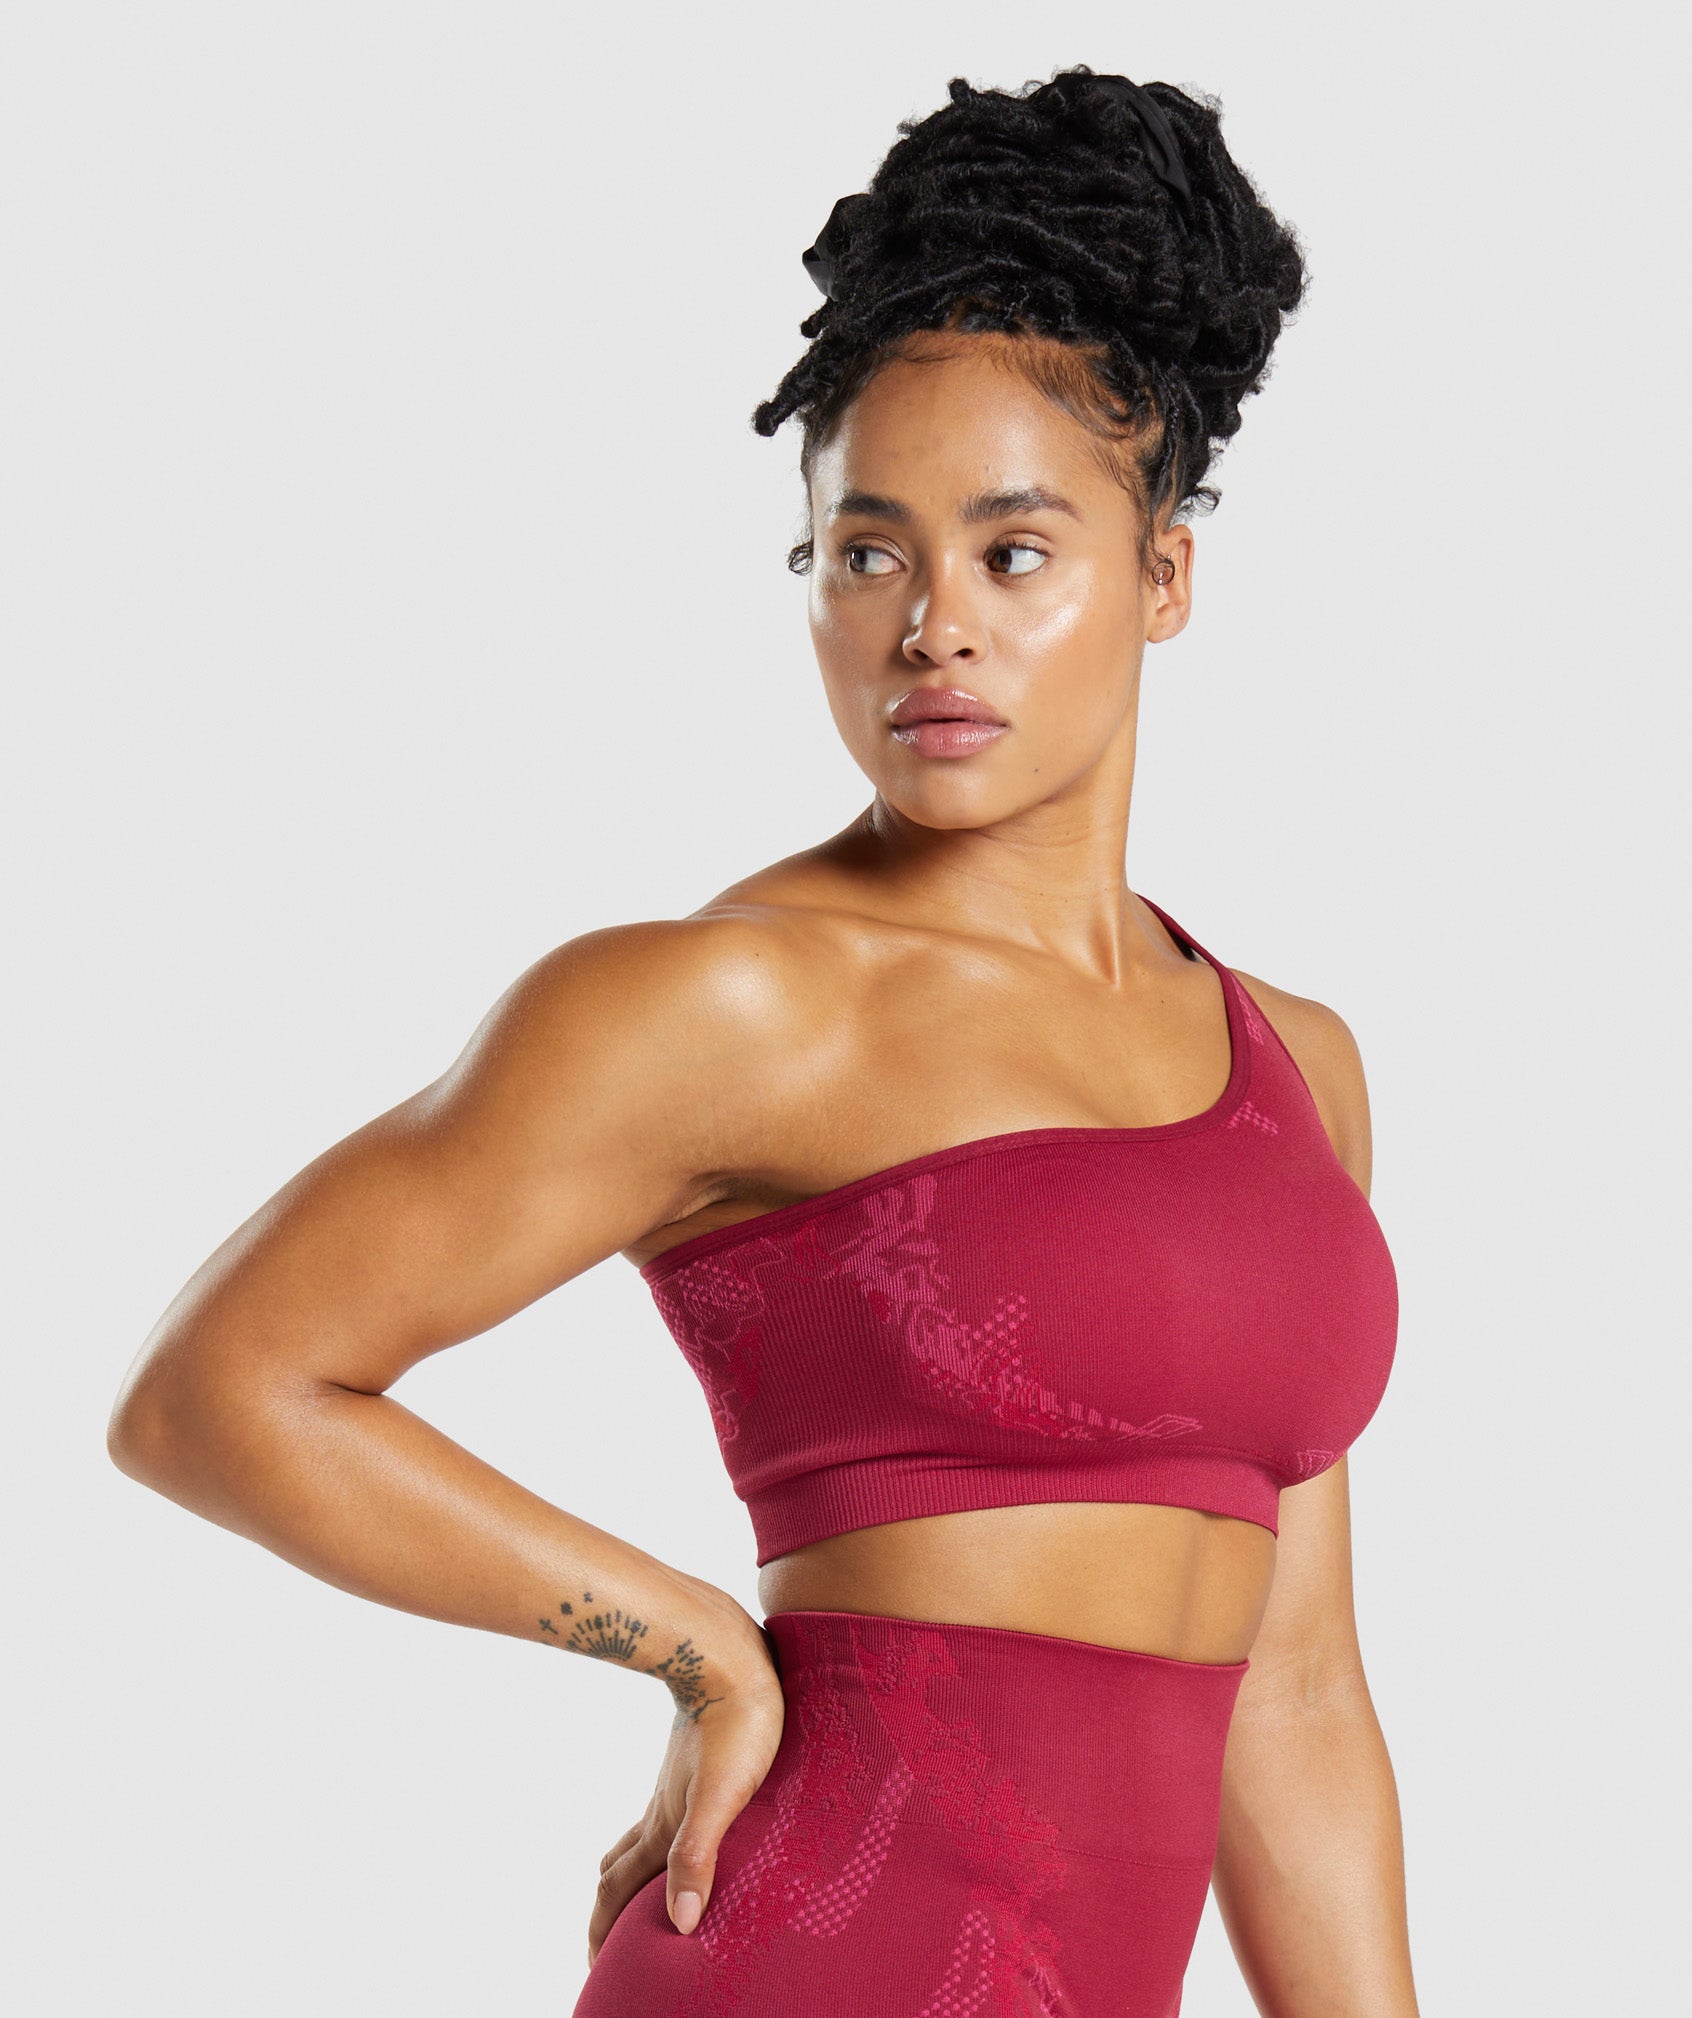 New Love & Sports Seamless Sports Bra adds trendy Hot Pink color